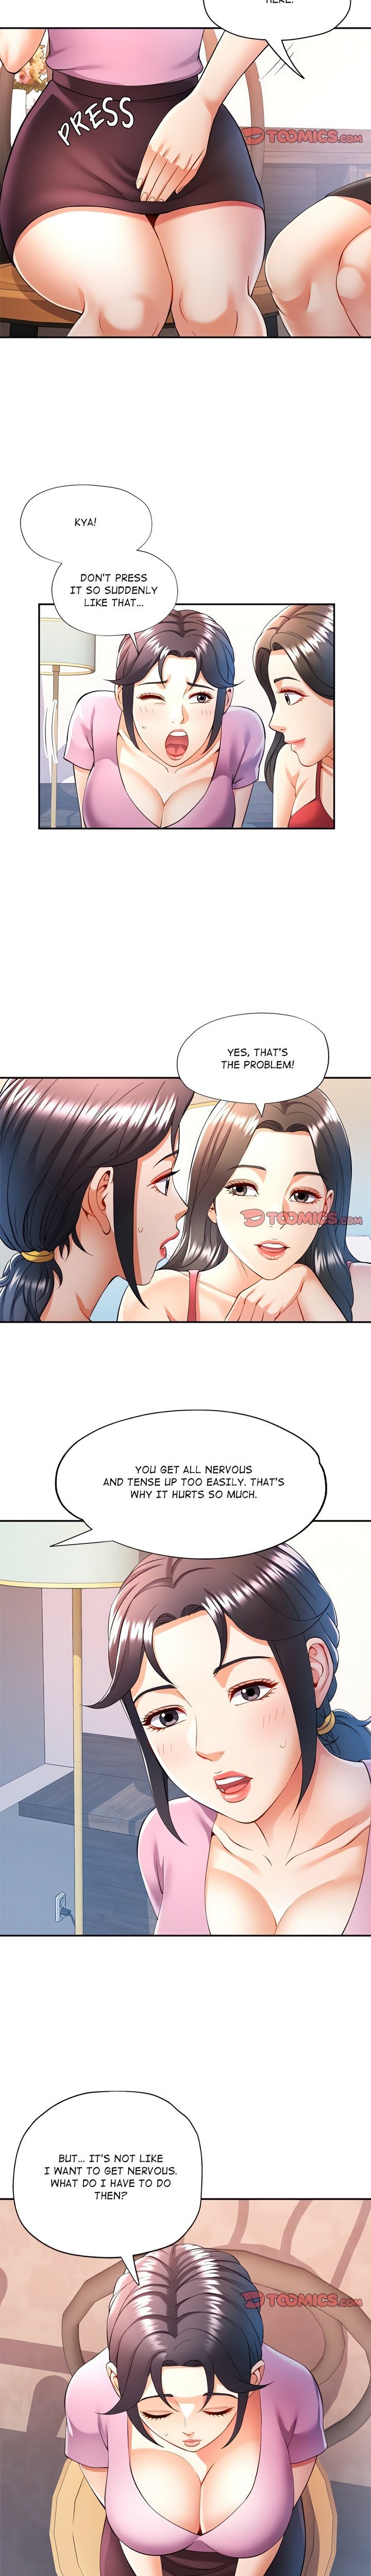 in-her-place-chap-28-17